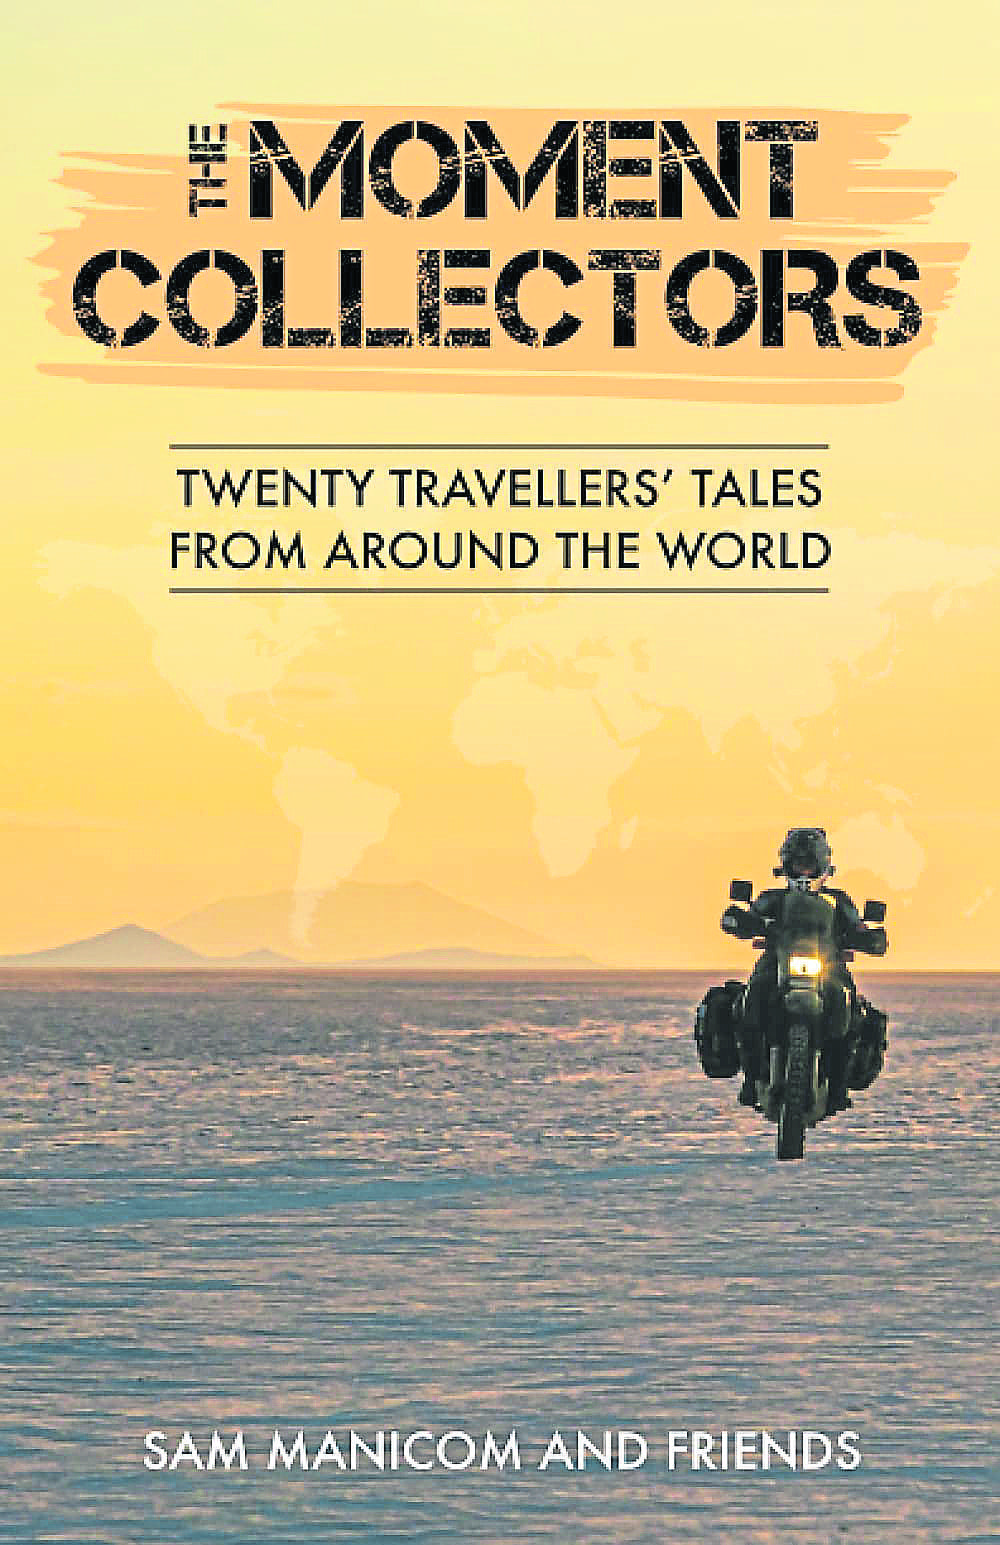 TOP READ! Twenty Travellers’ Tales from Around the World